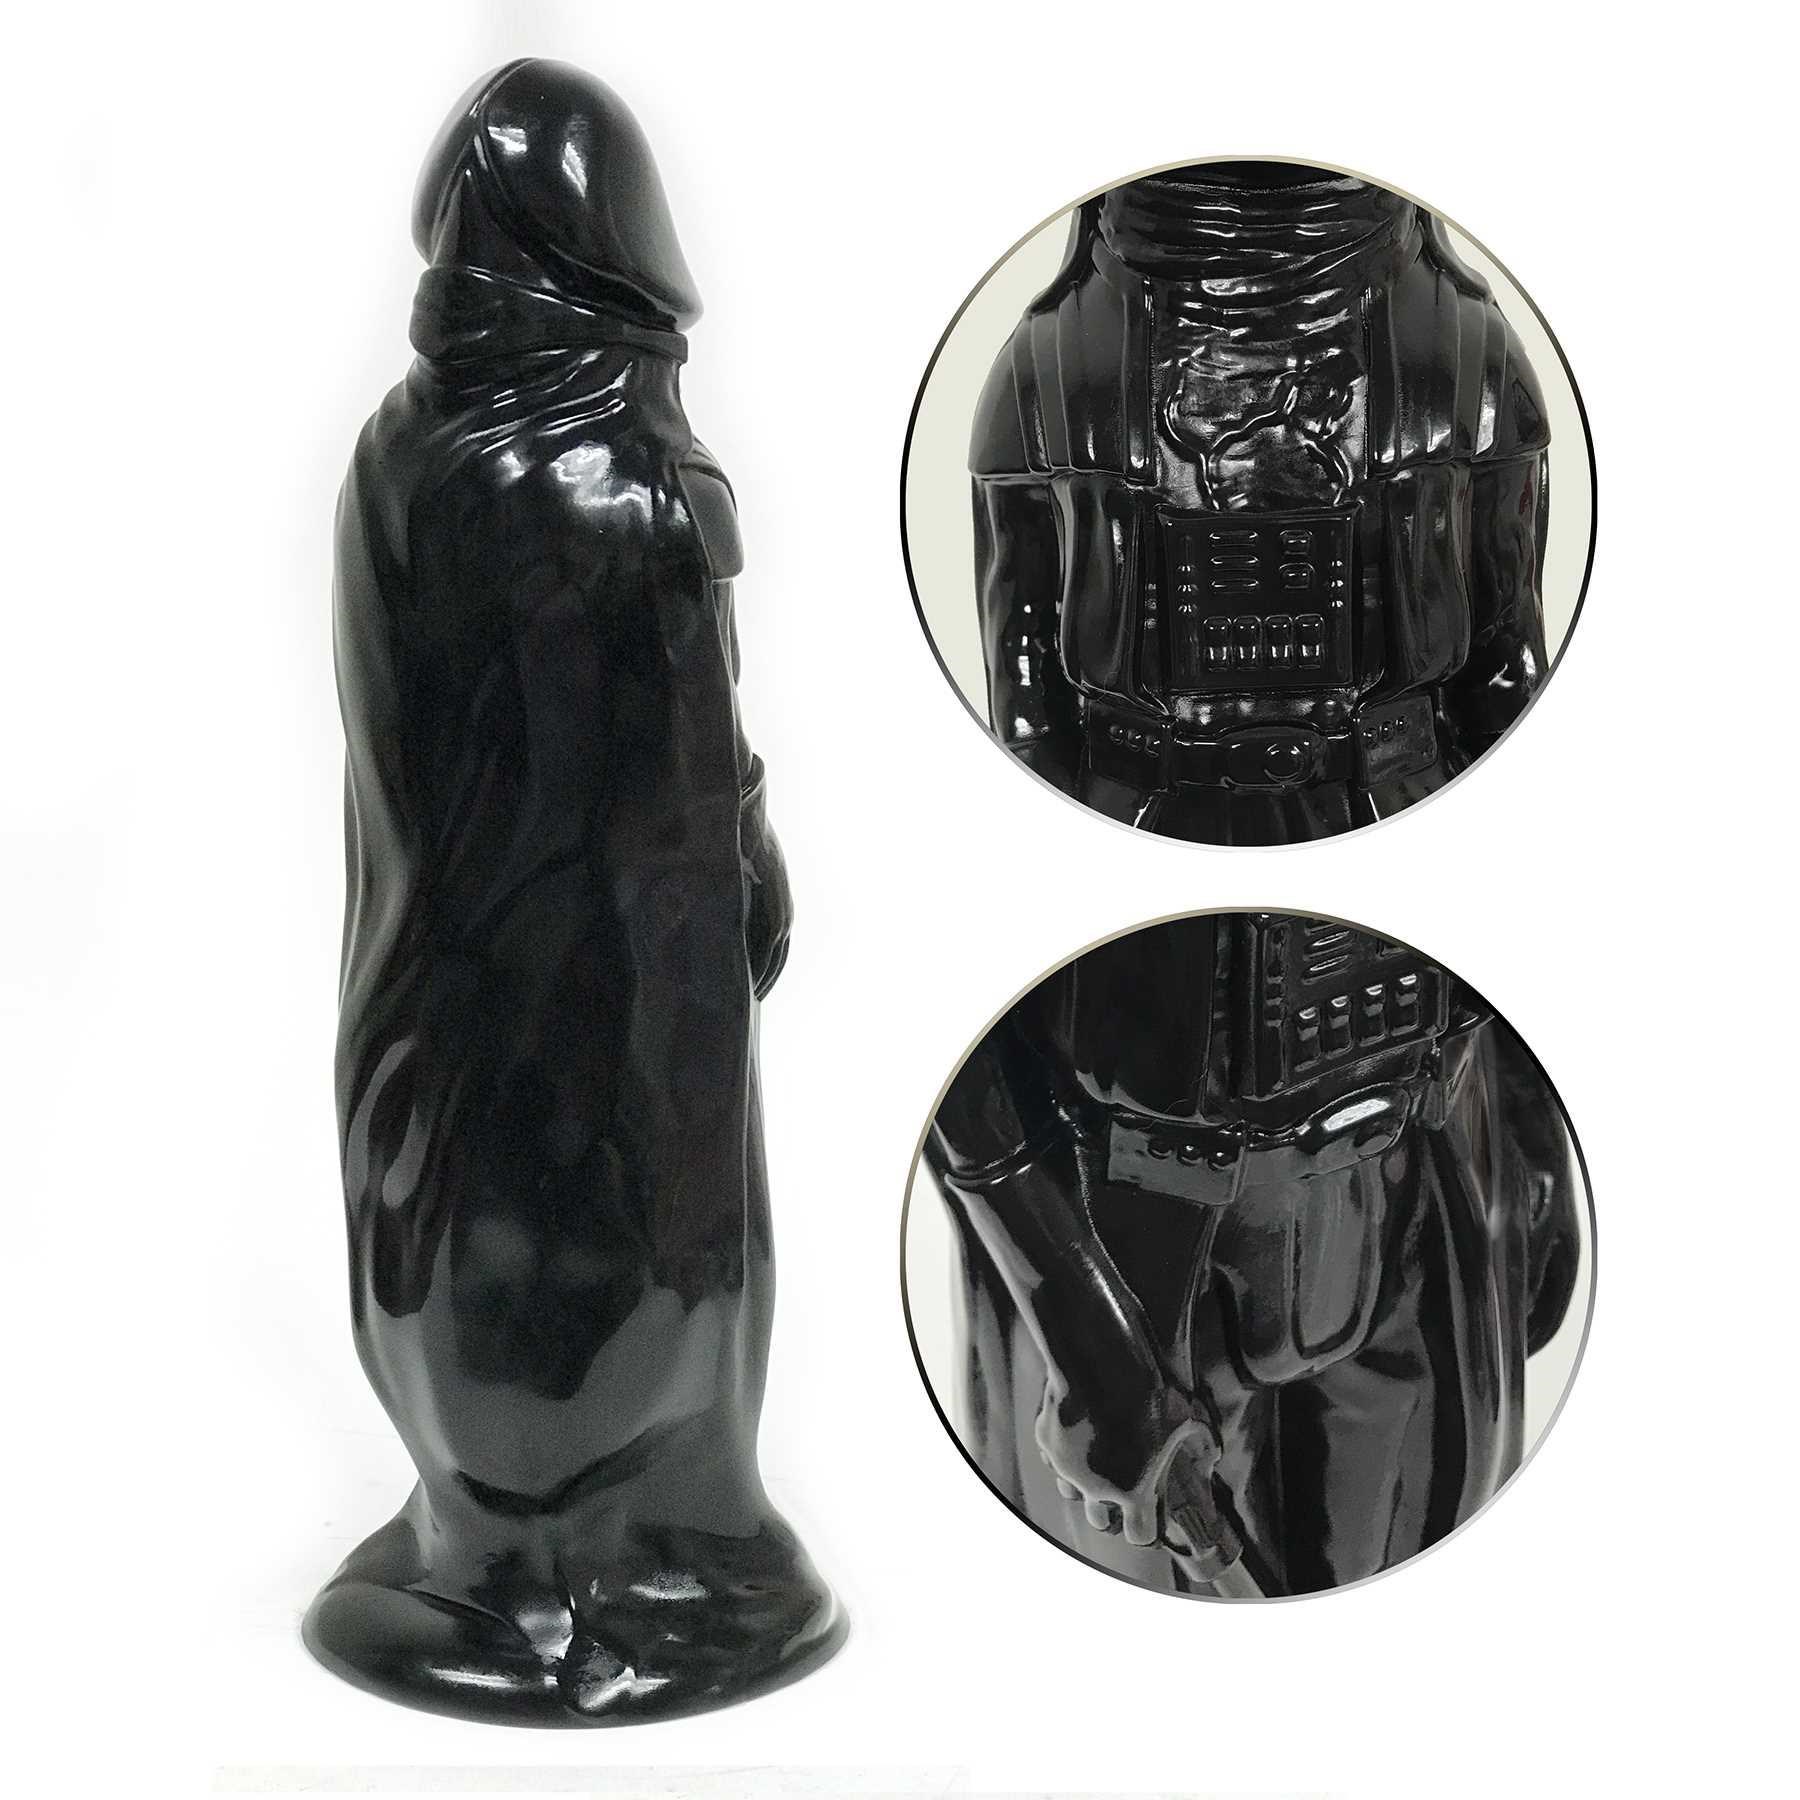 Darth Invader Dildo call out features